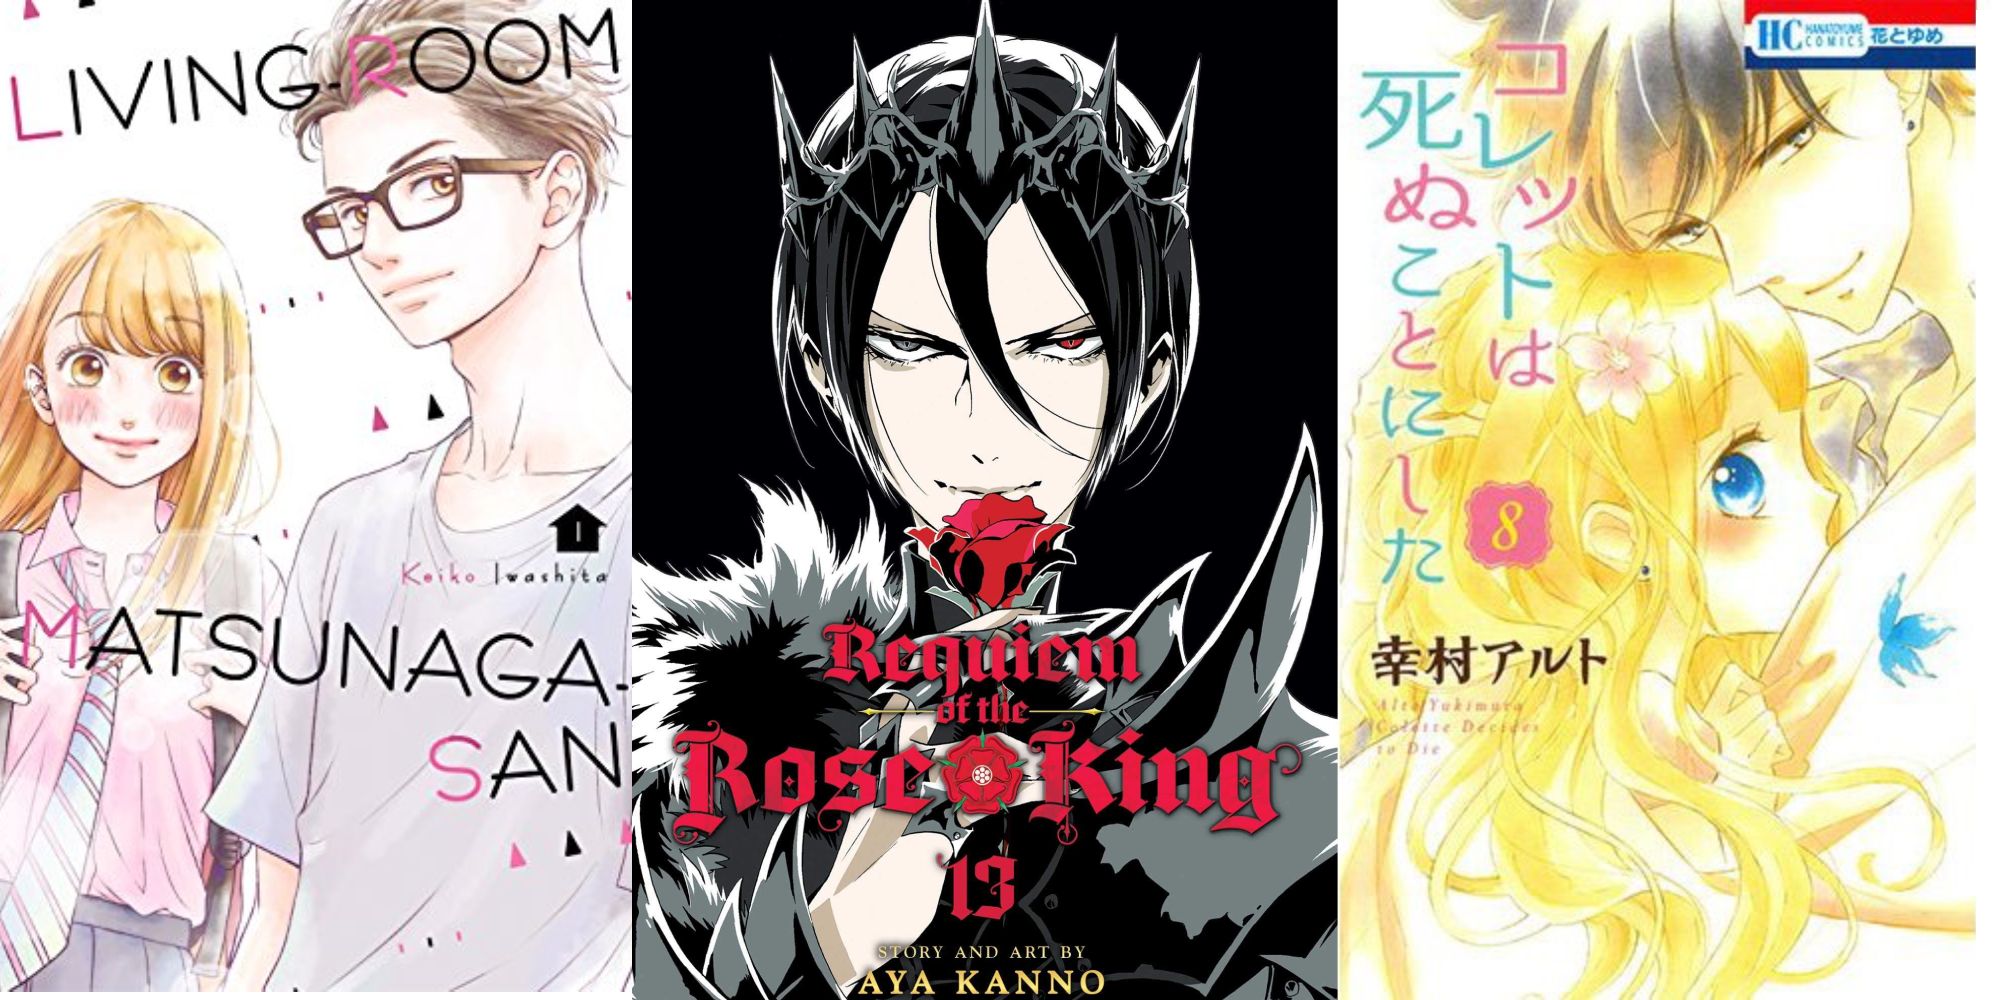 Split image featuring cover arts of the manfs Living Room Matsunaga-San, Requiem of the Rose King and Colette Decided to Die.